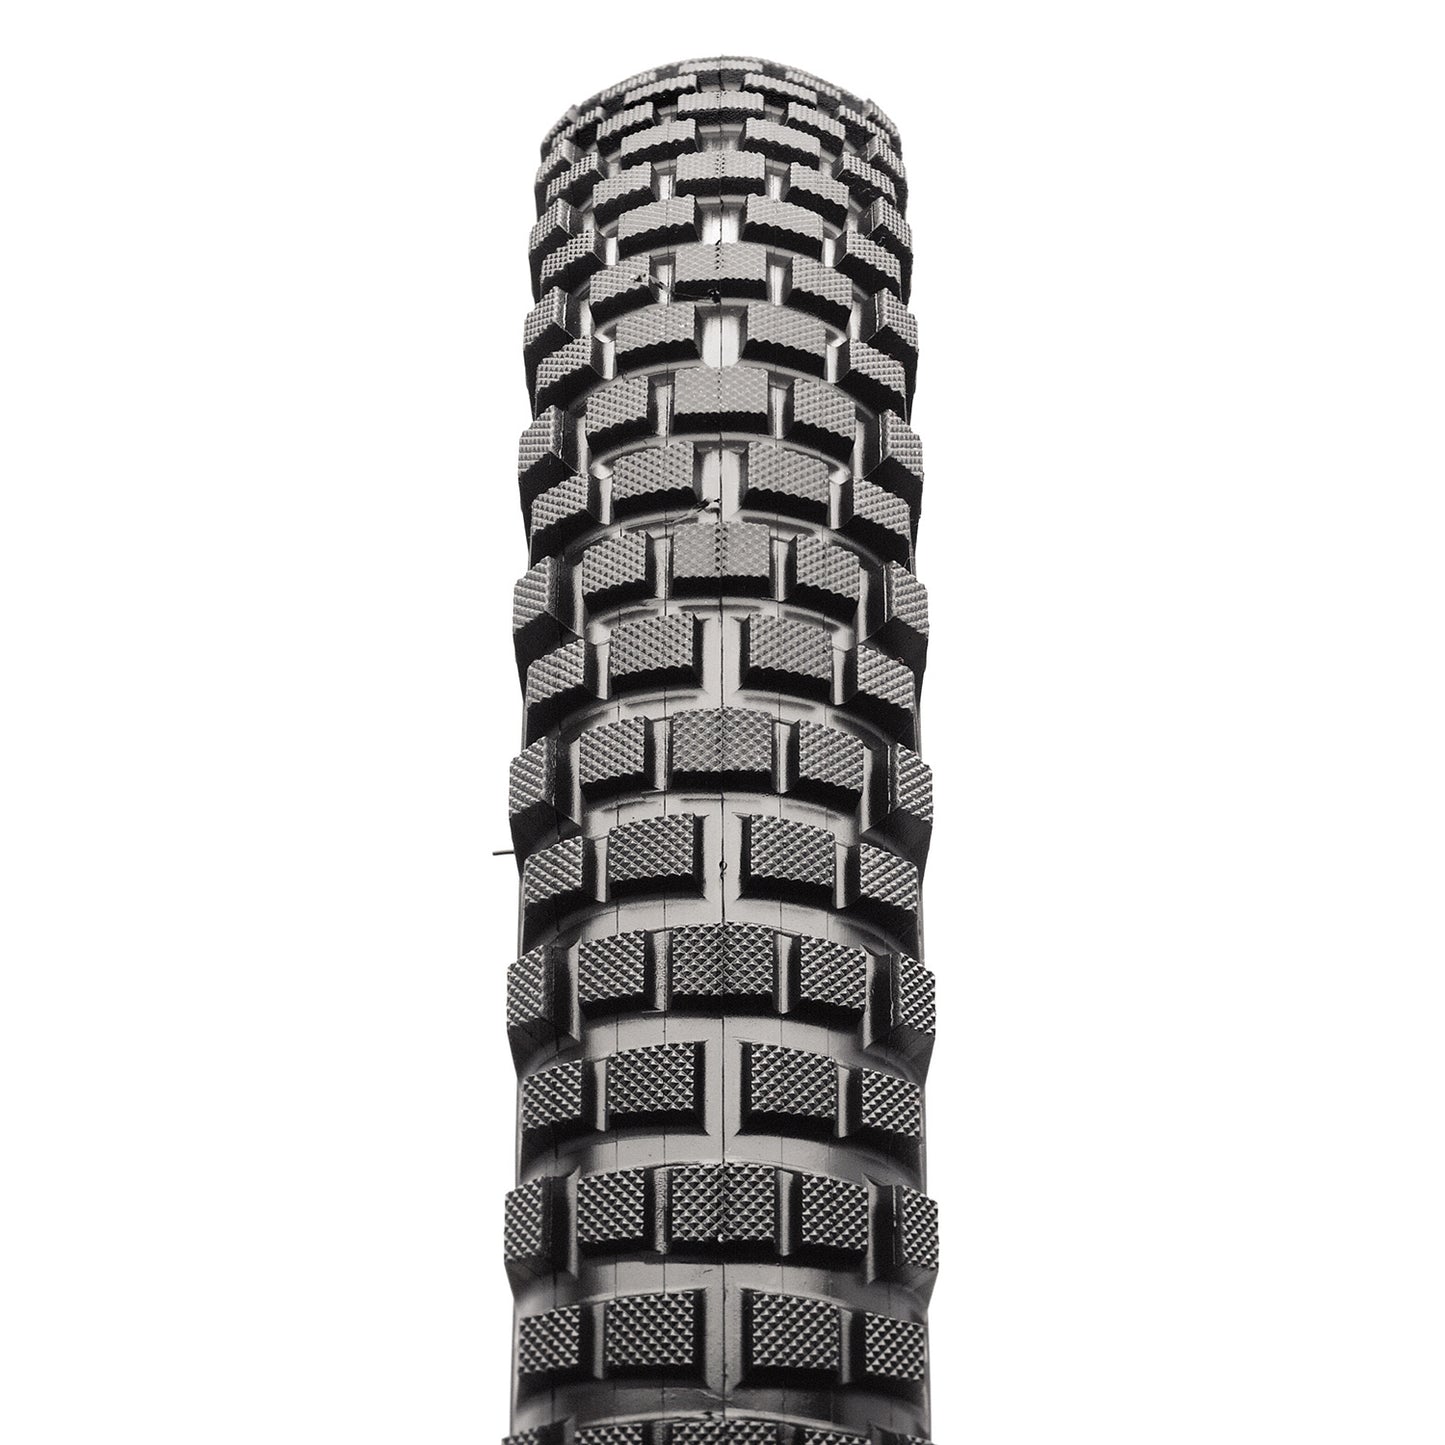 Maxxis Creepy Crawler Front Tyre - Wirebead - Single Ply - 42a Super Tacky - 2.0 Inch - 20 Inch